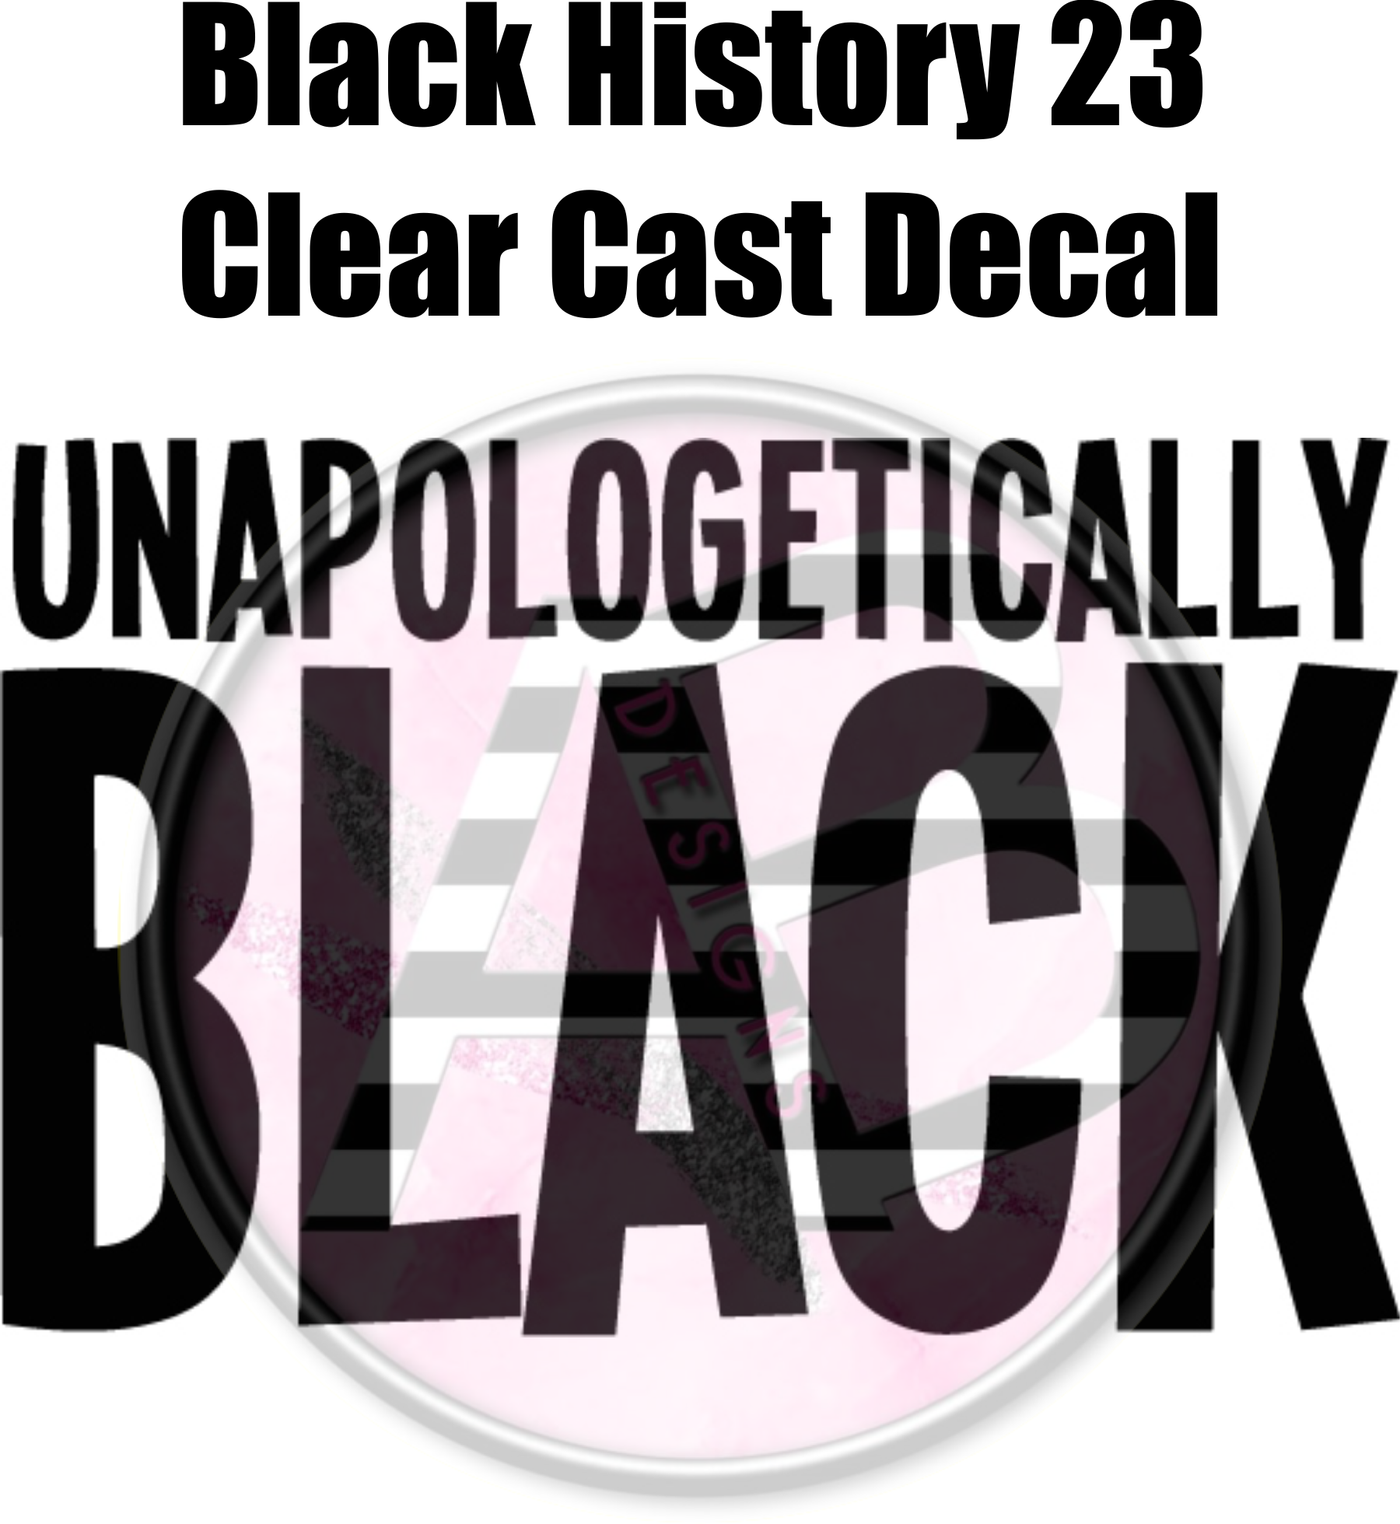 Black History 23 - Clear Cast Decal